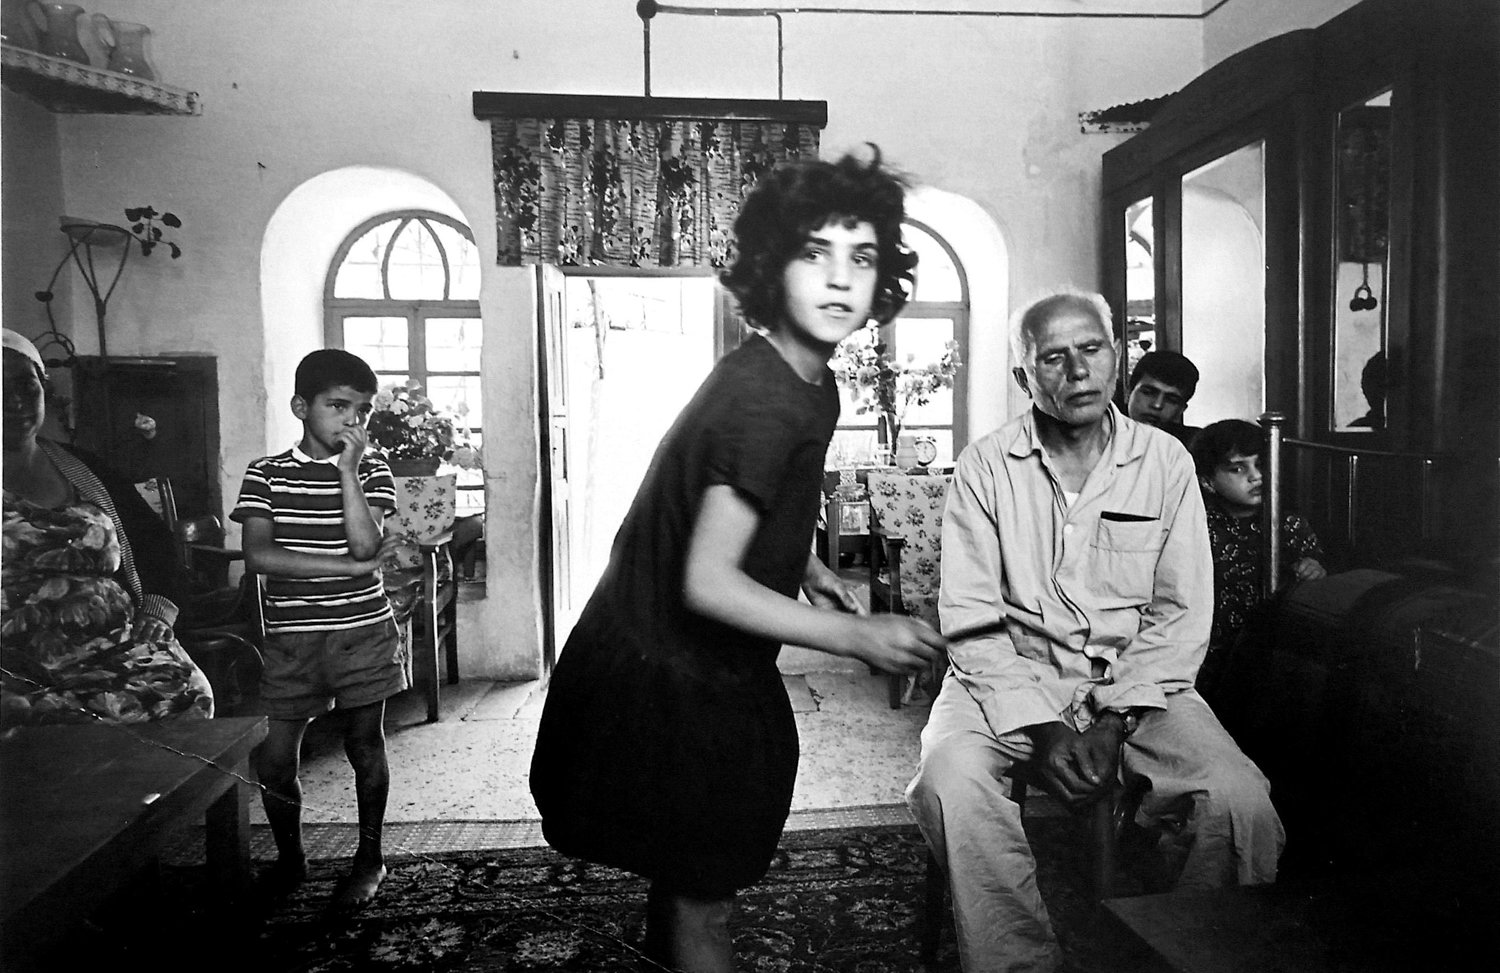 Leonard Freed photographed an Arab family at home in the Old City in 1967.